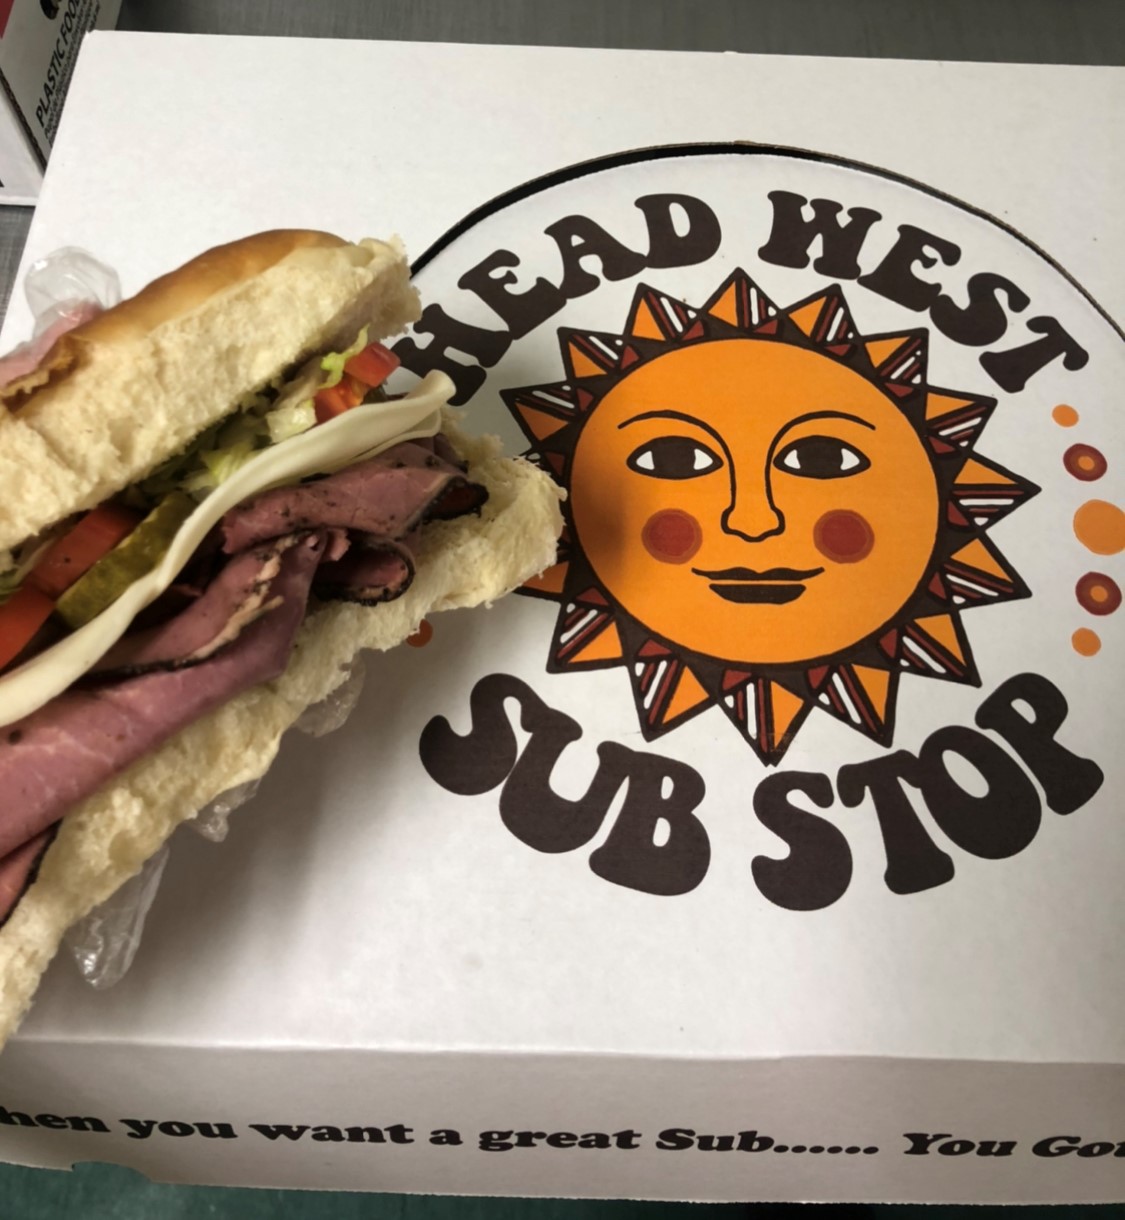 Head West Sub Stop - West